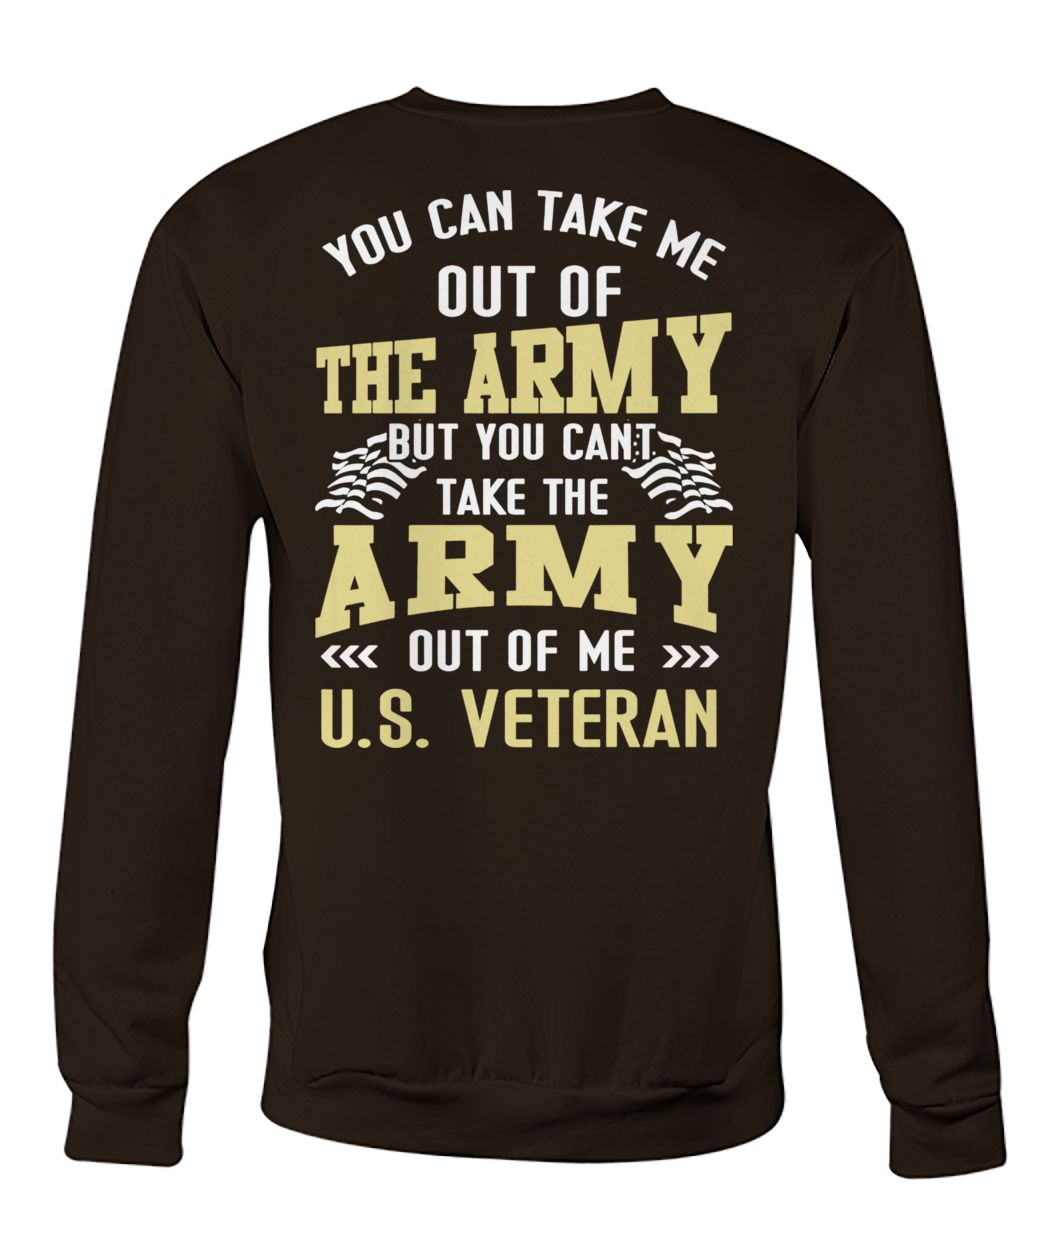 You can take me out of the army but you can't take the army out of me US veteran crew neck sweatshirt